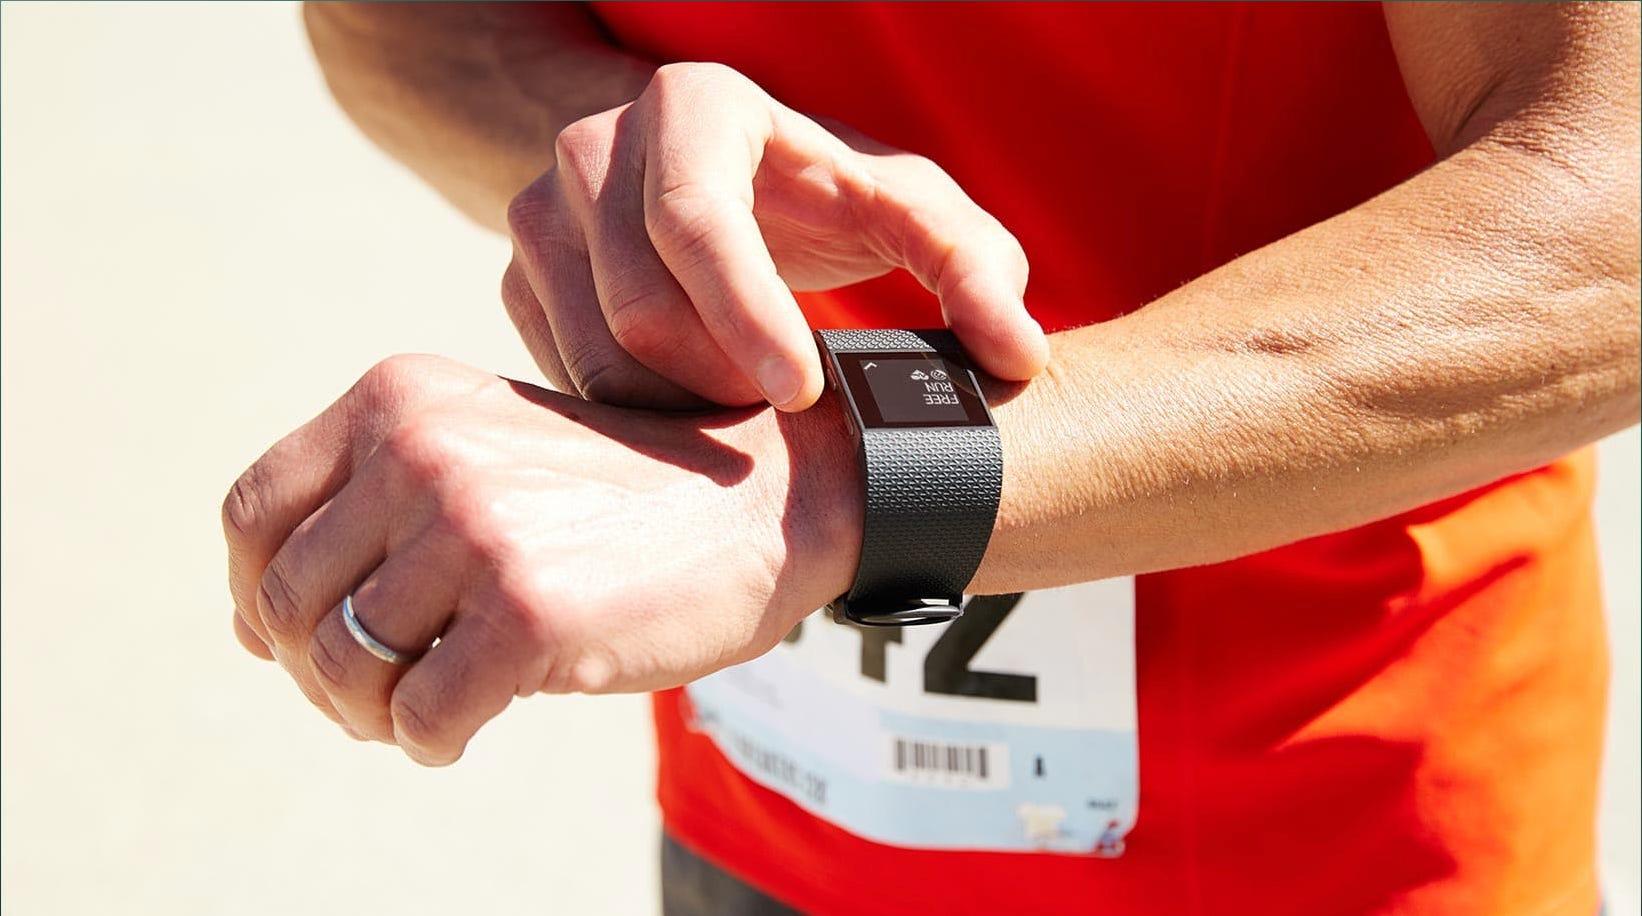 how to use strava with fitbit